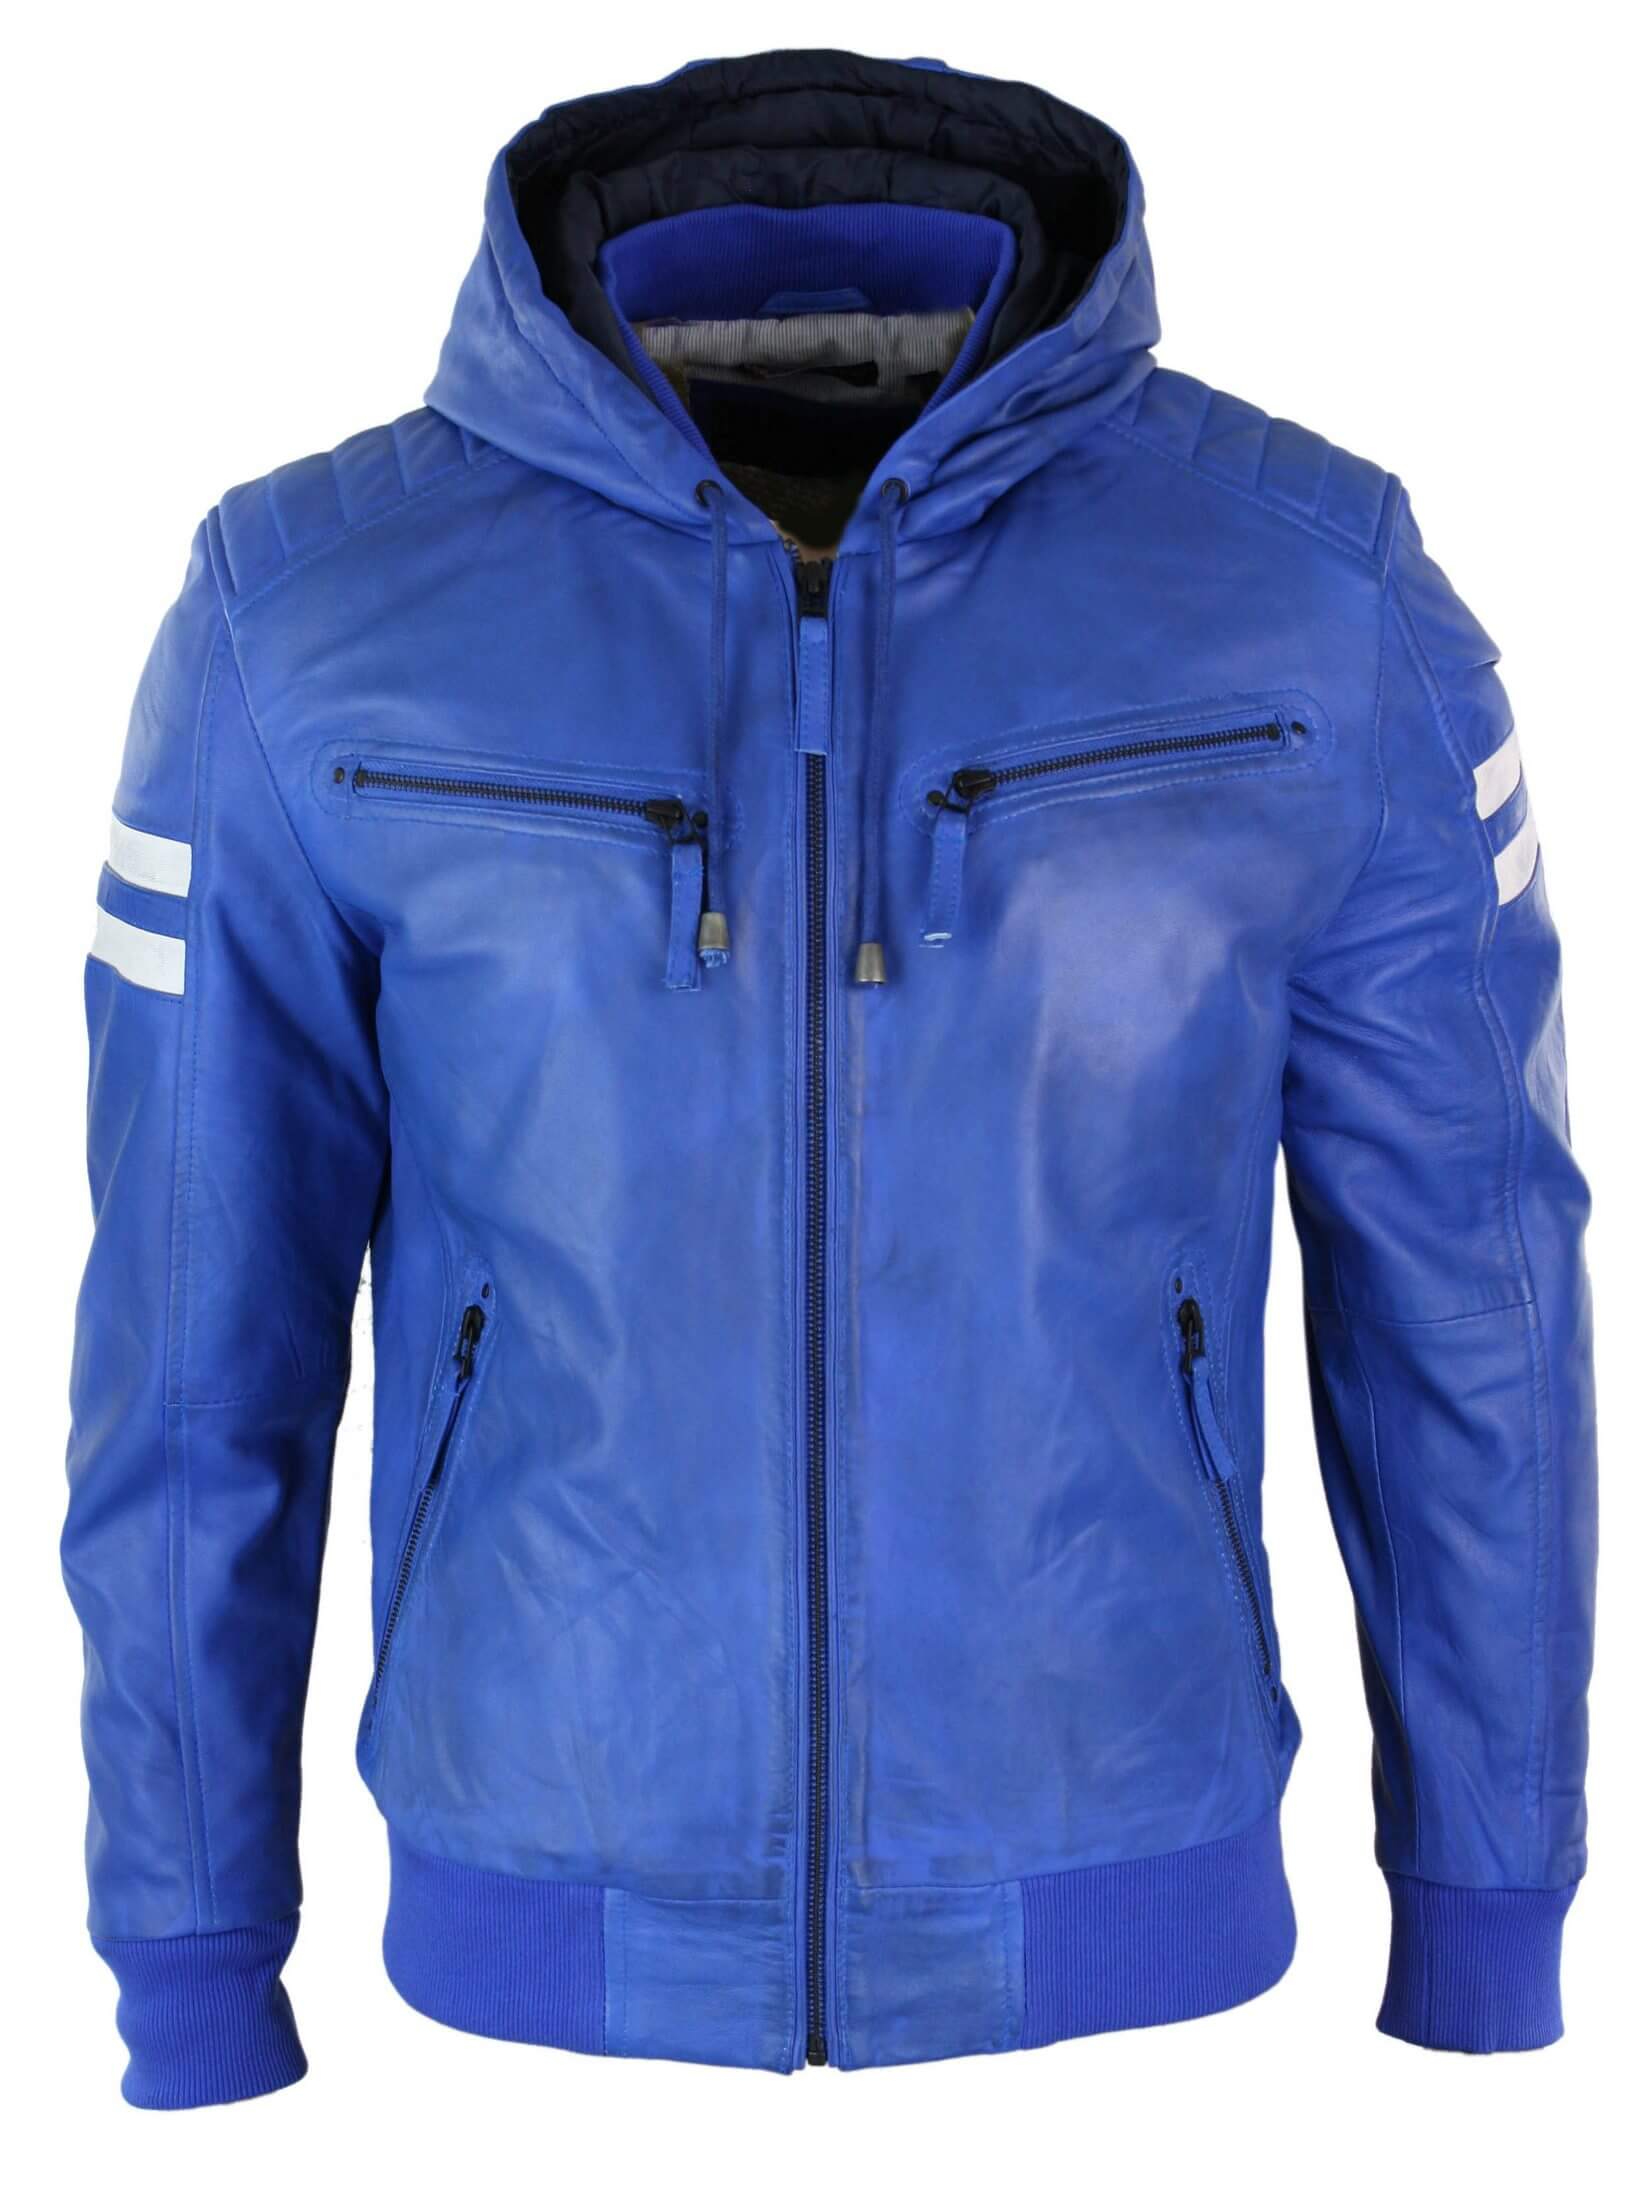 Men's Realy Leather Bomber Jacket with Hood-Blue: Buy Online - Happy ...